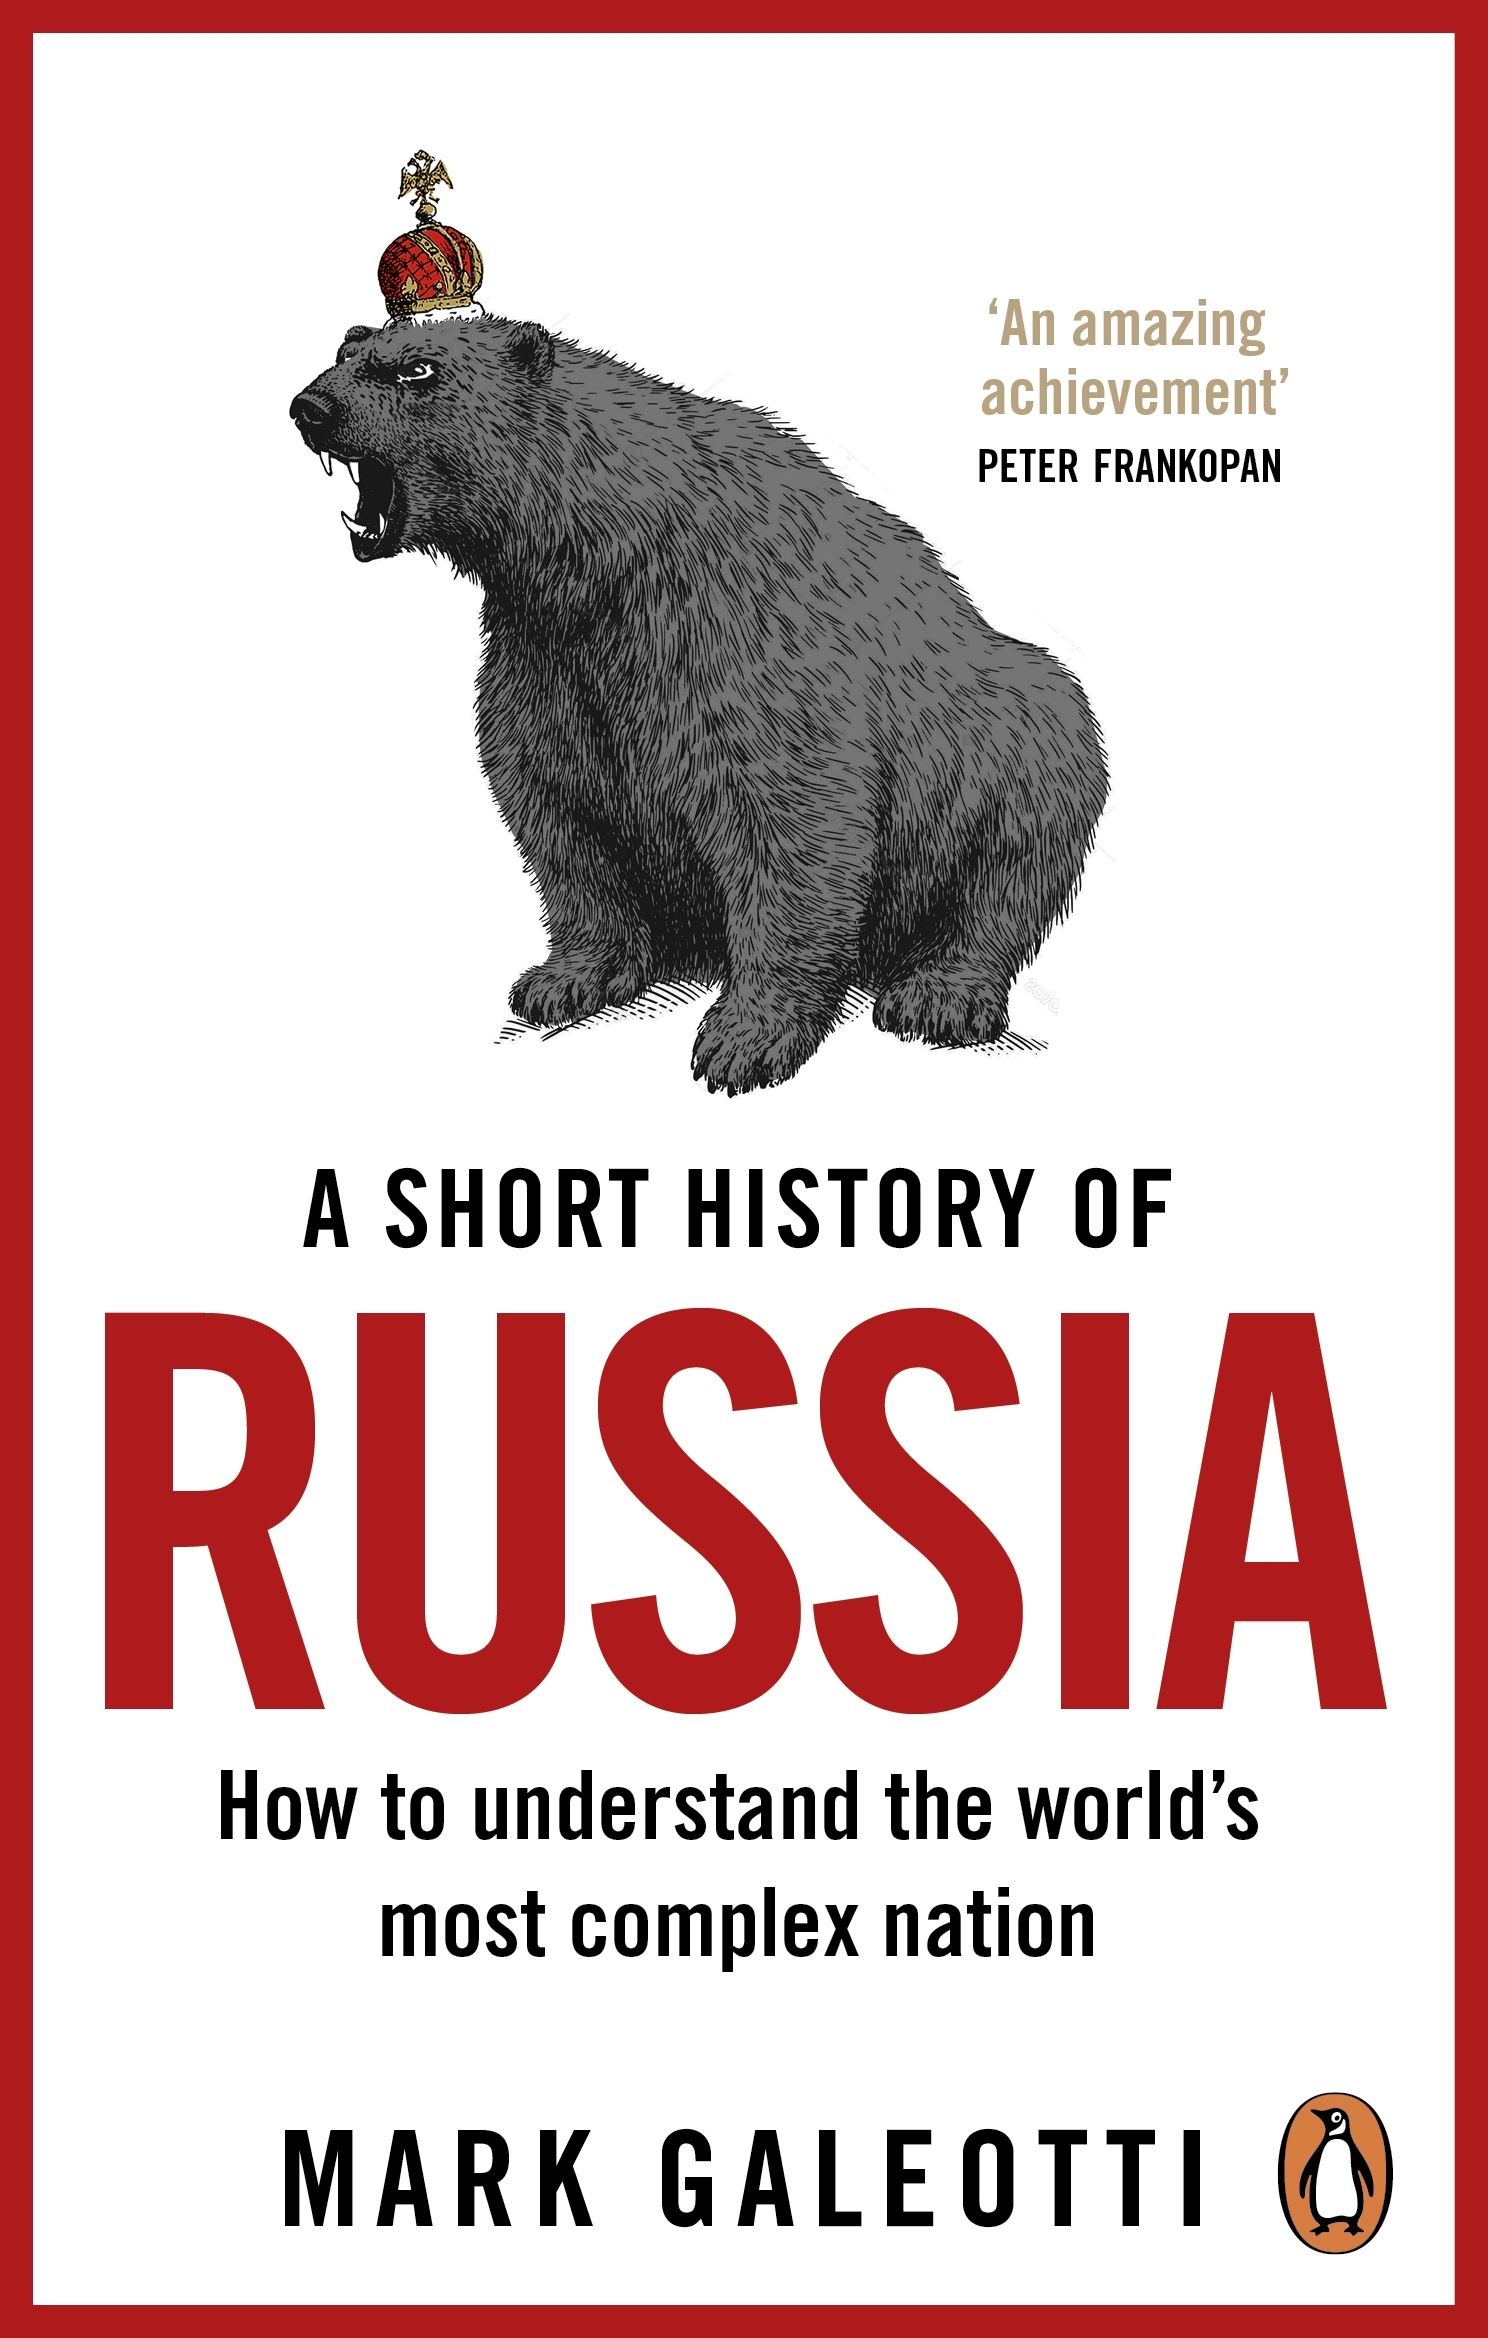 biography of russia